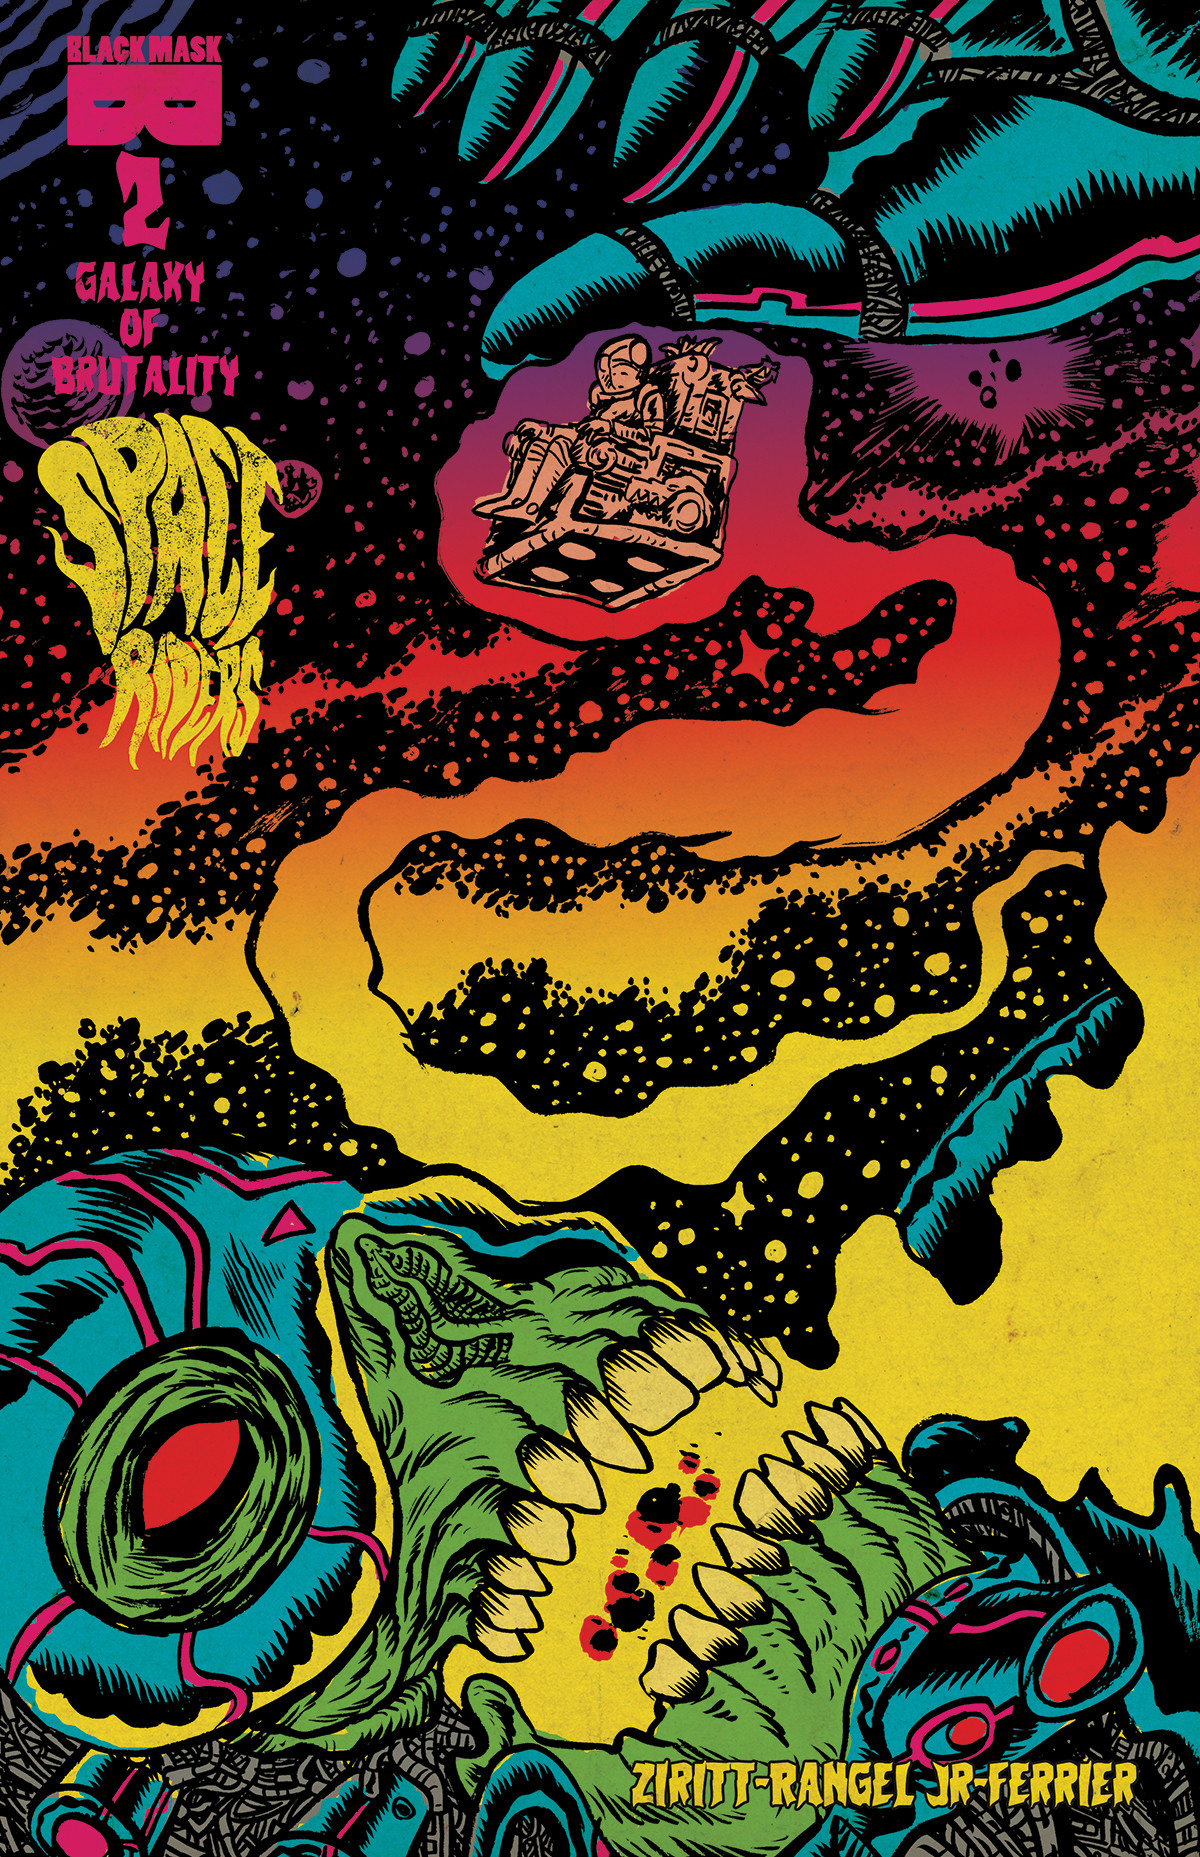 SPACE RIDERS GALAXY OF BRUTALITY #2 (MR)